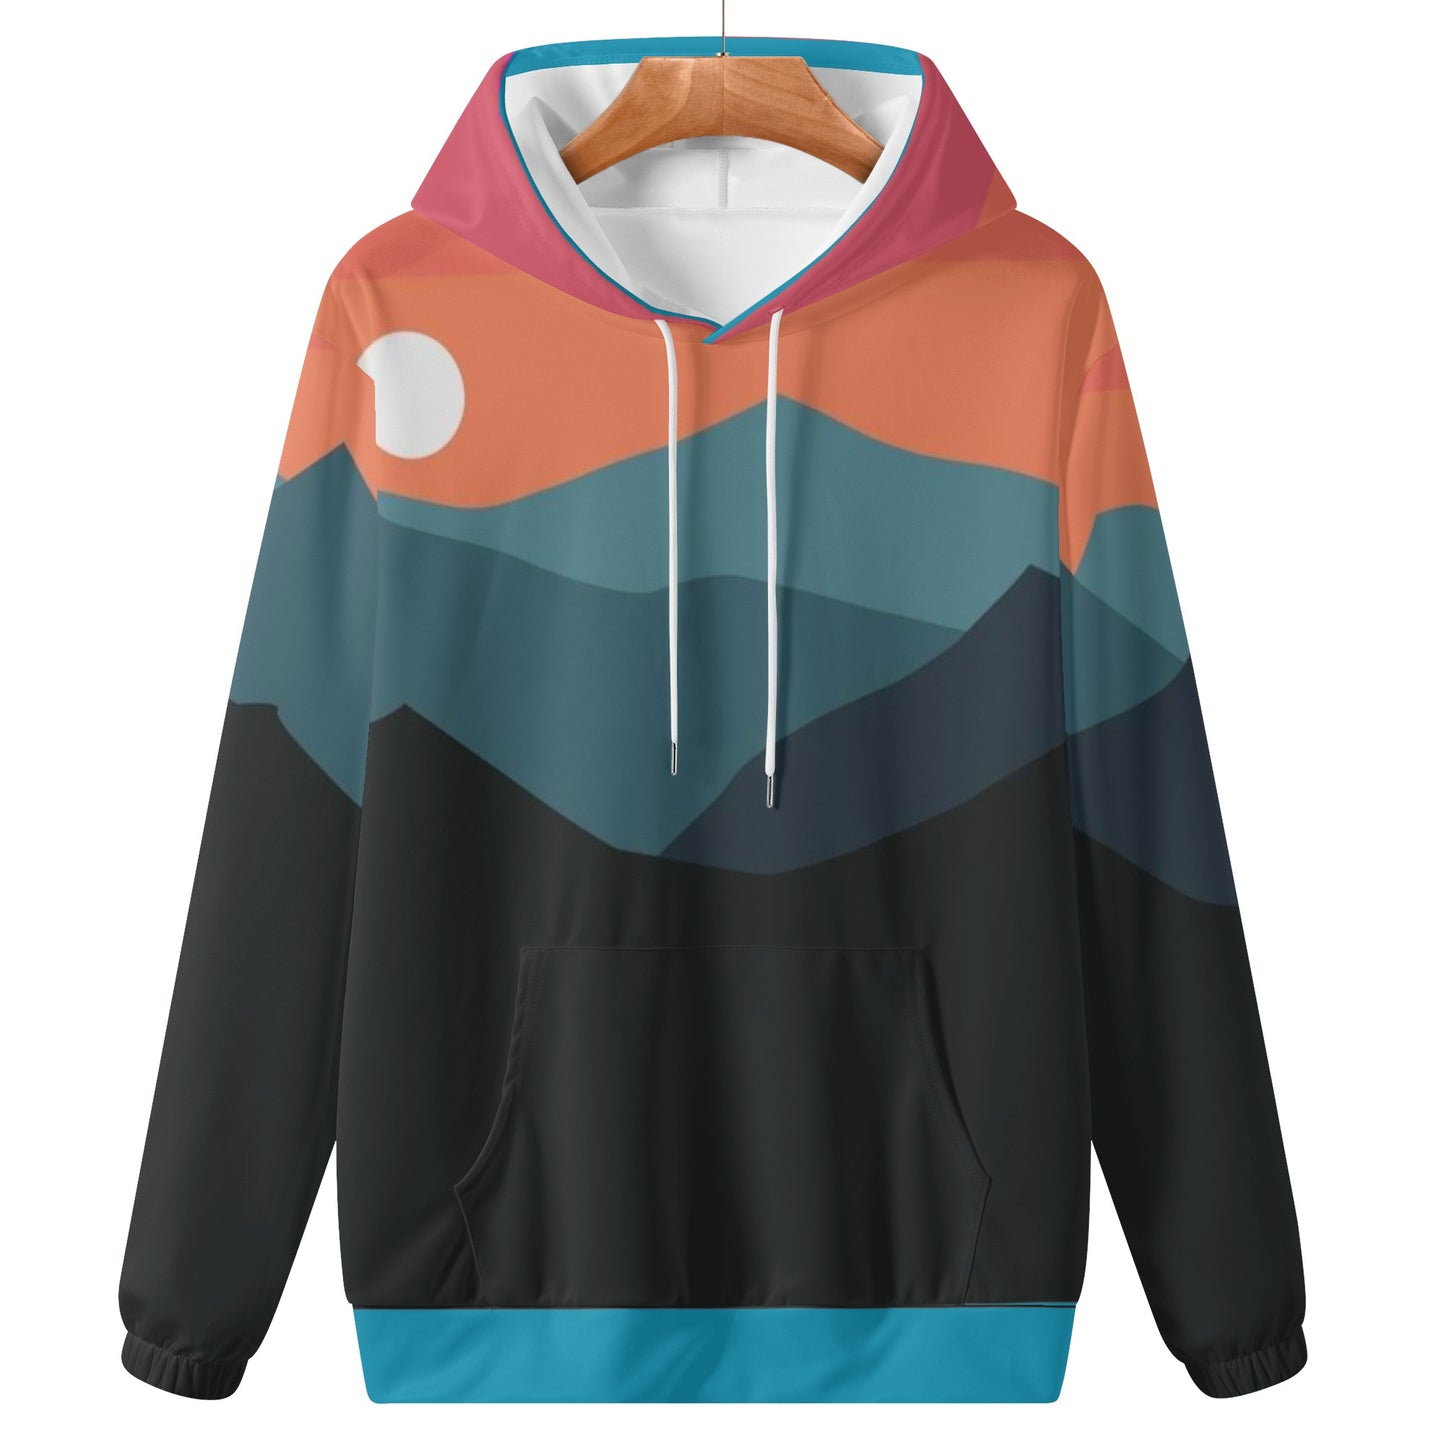 Pure Nature Project Mont Blanc lightweight All Over Printing Hoodie Sweatshirt -Contact us for delivery times-